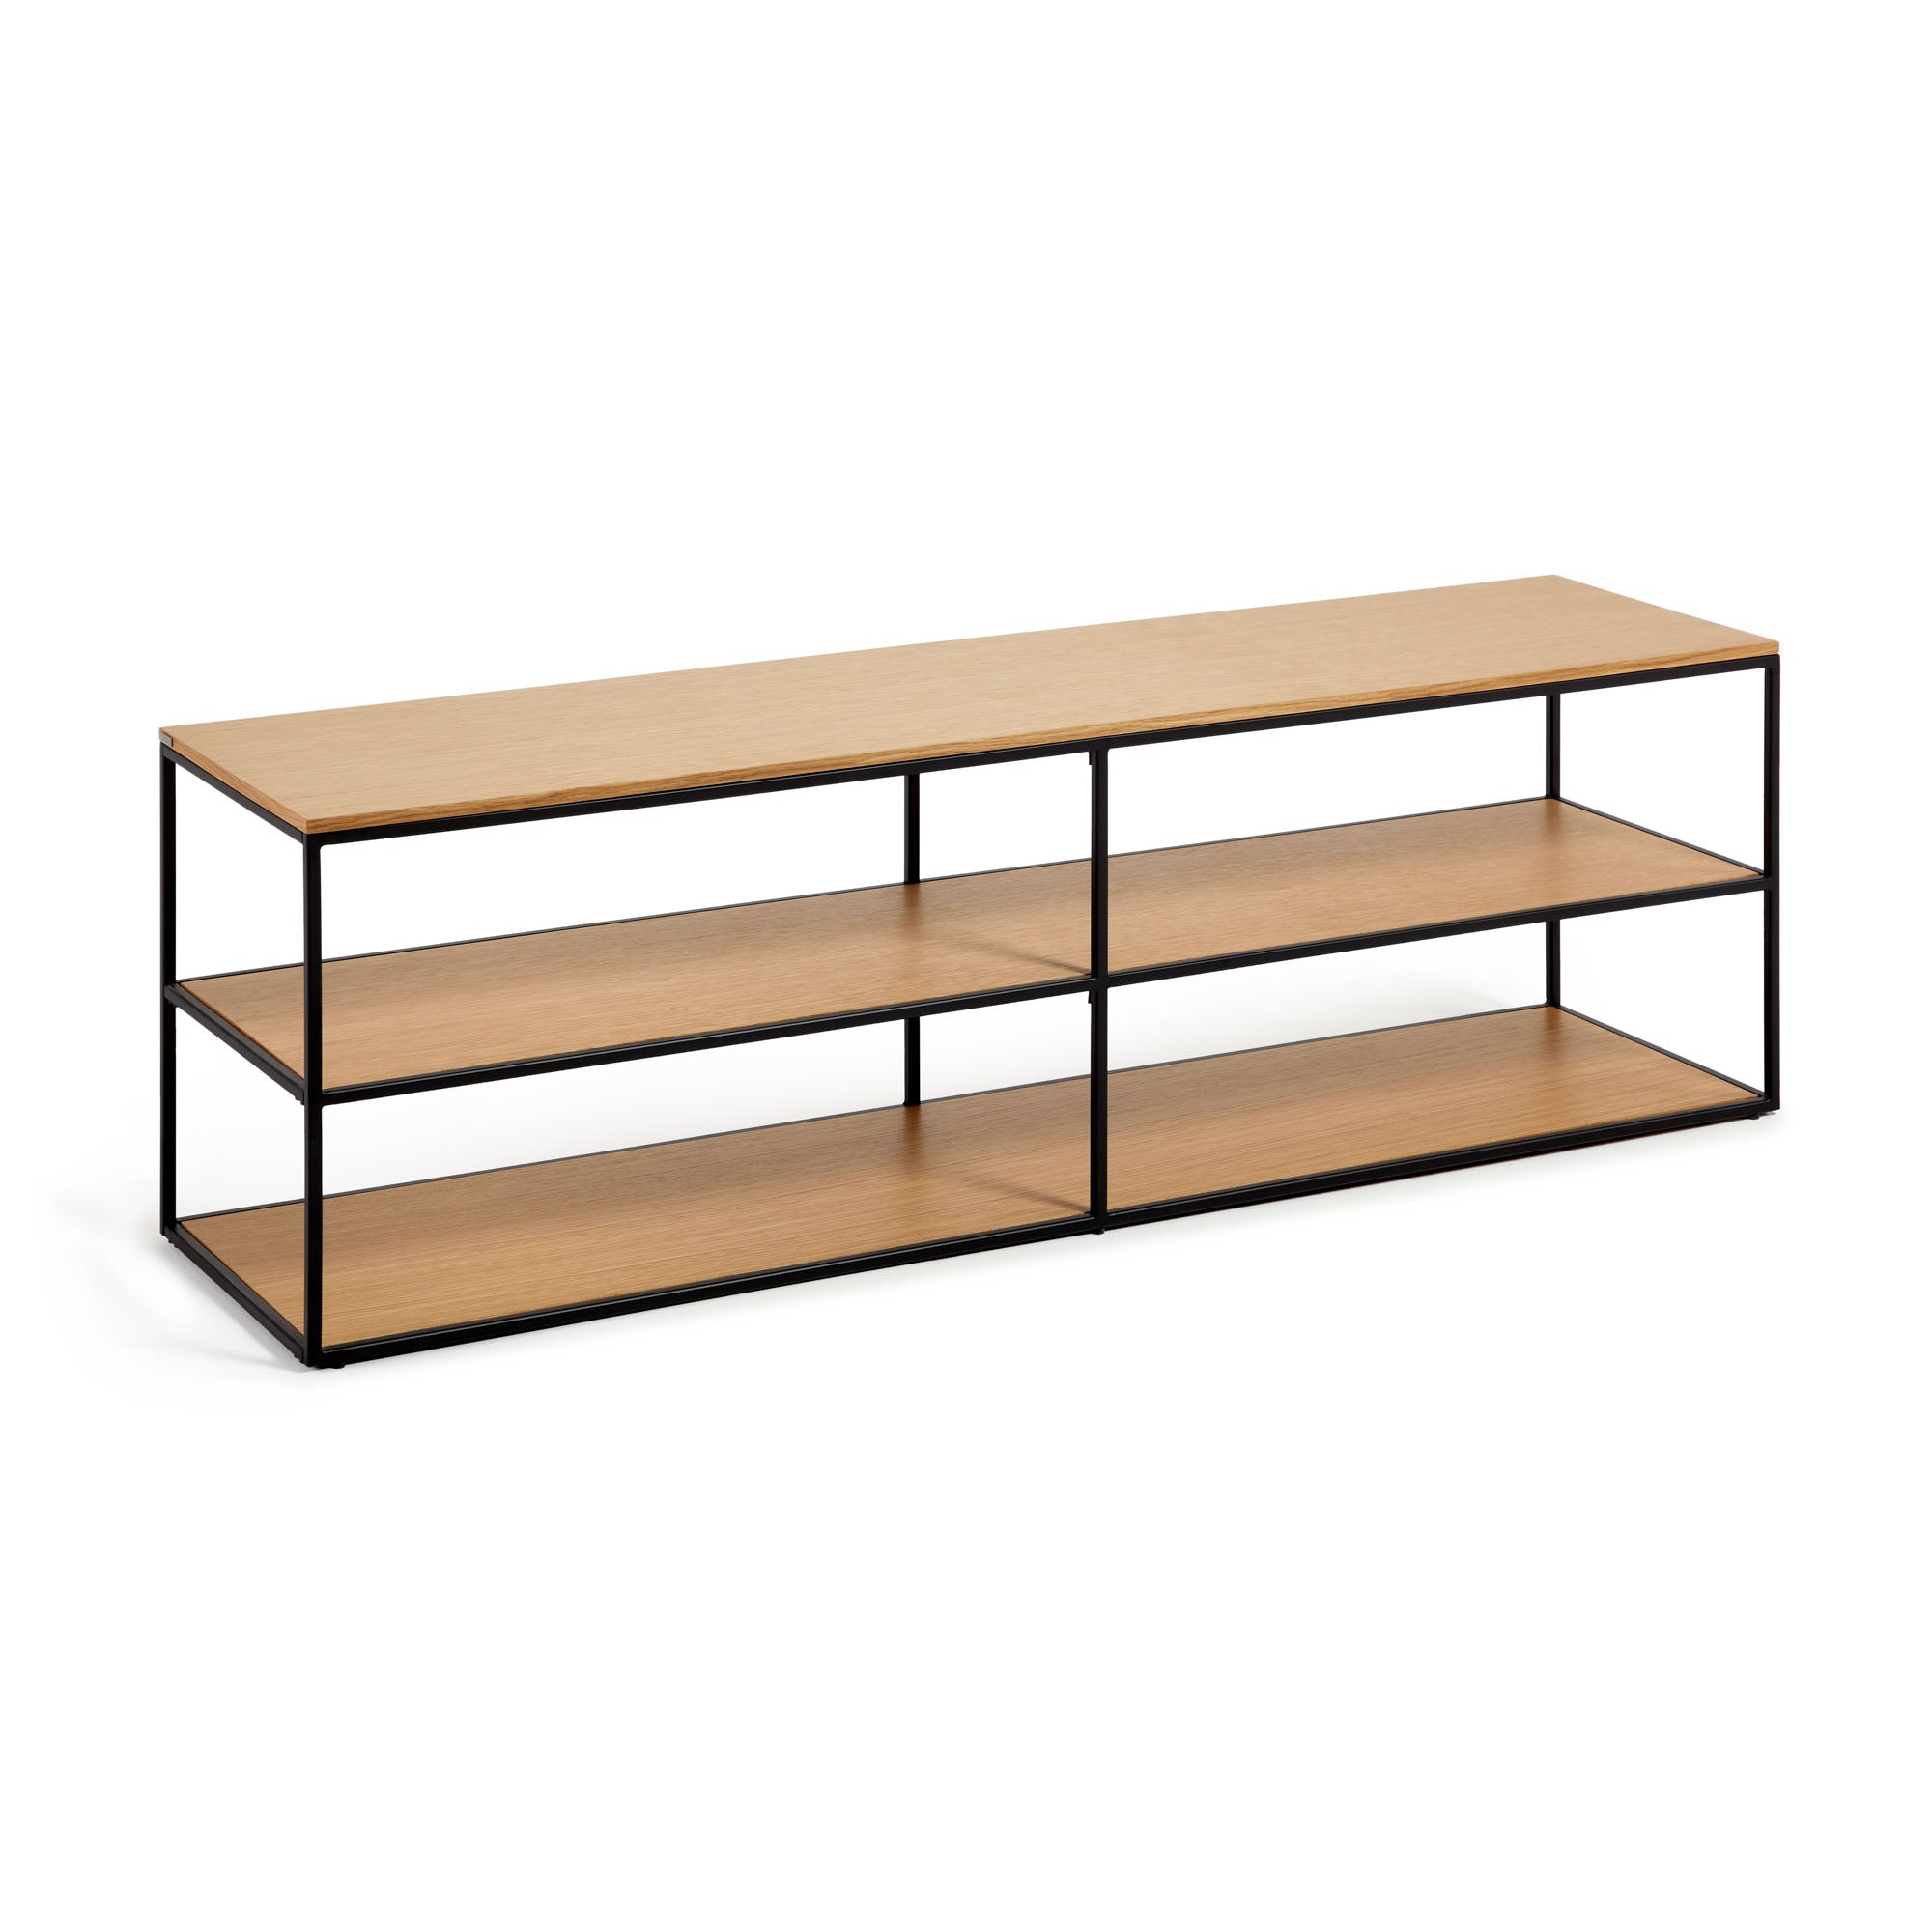 Yoana TV stand with an oak wood veneer and painted black metal structure, 160 x 40 cm